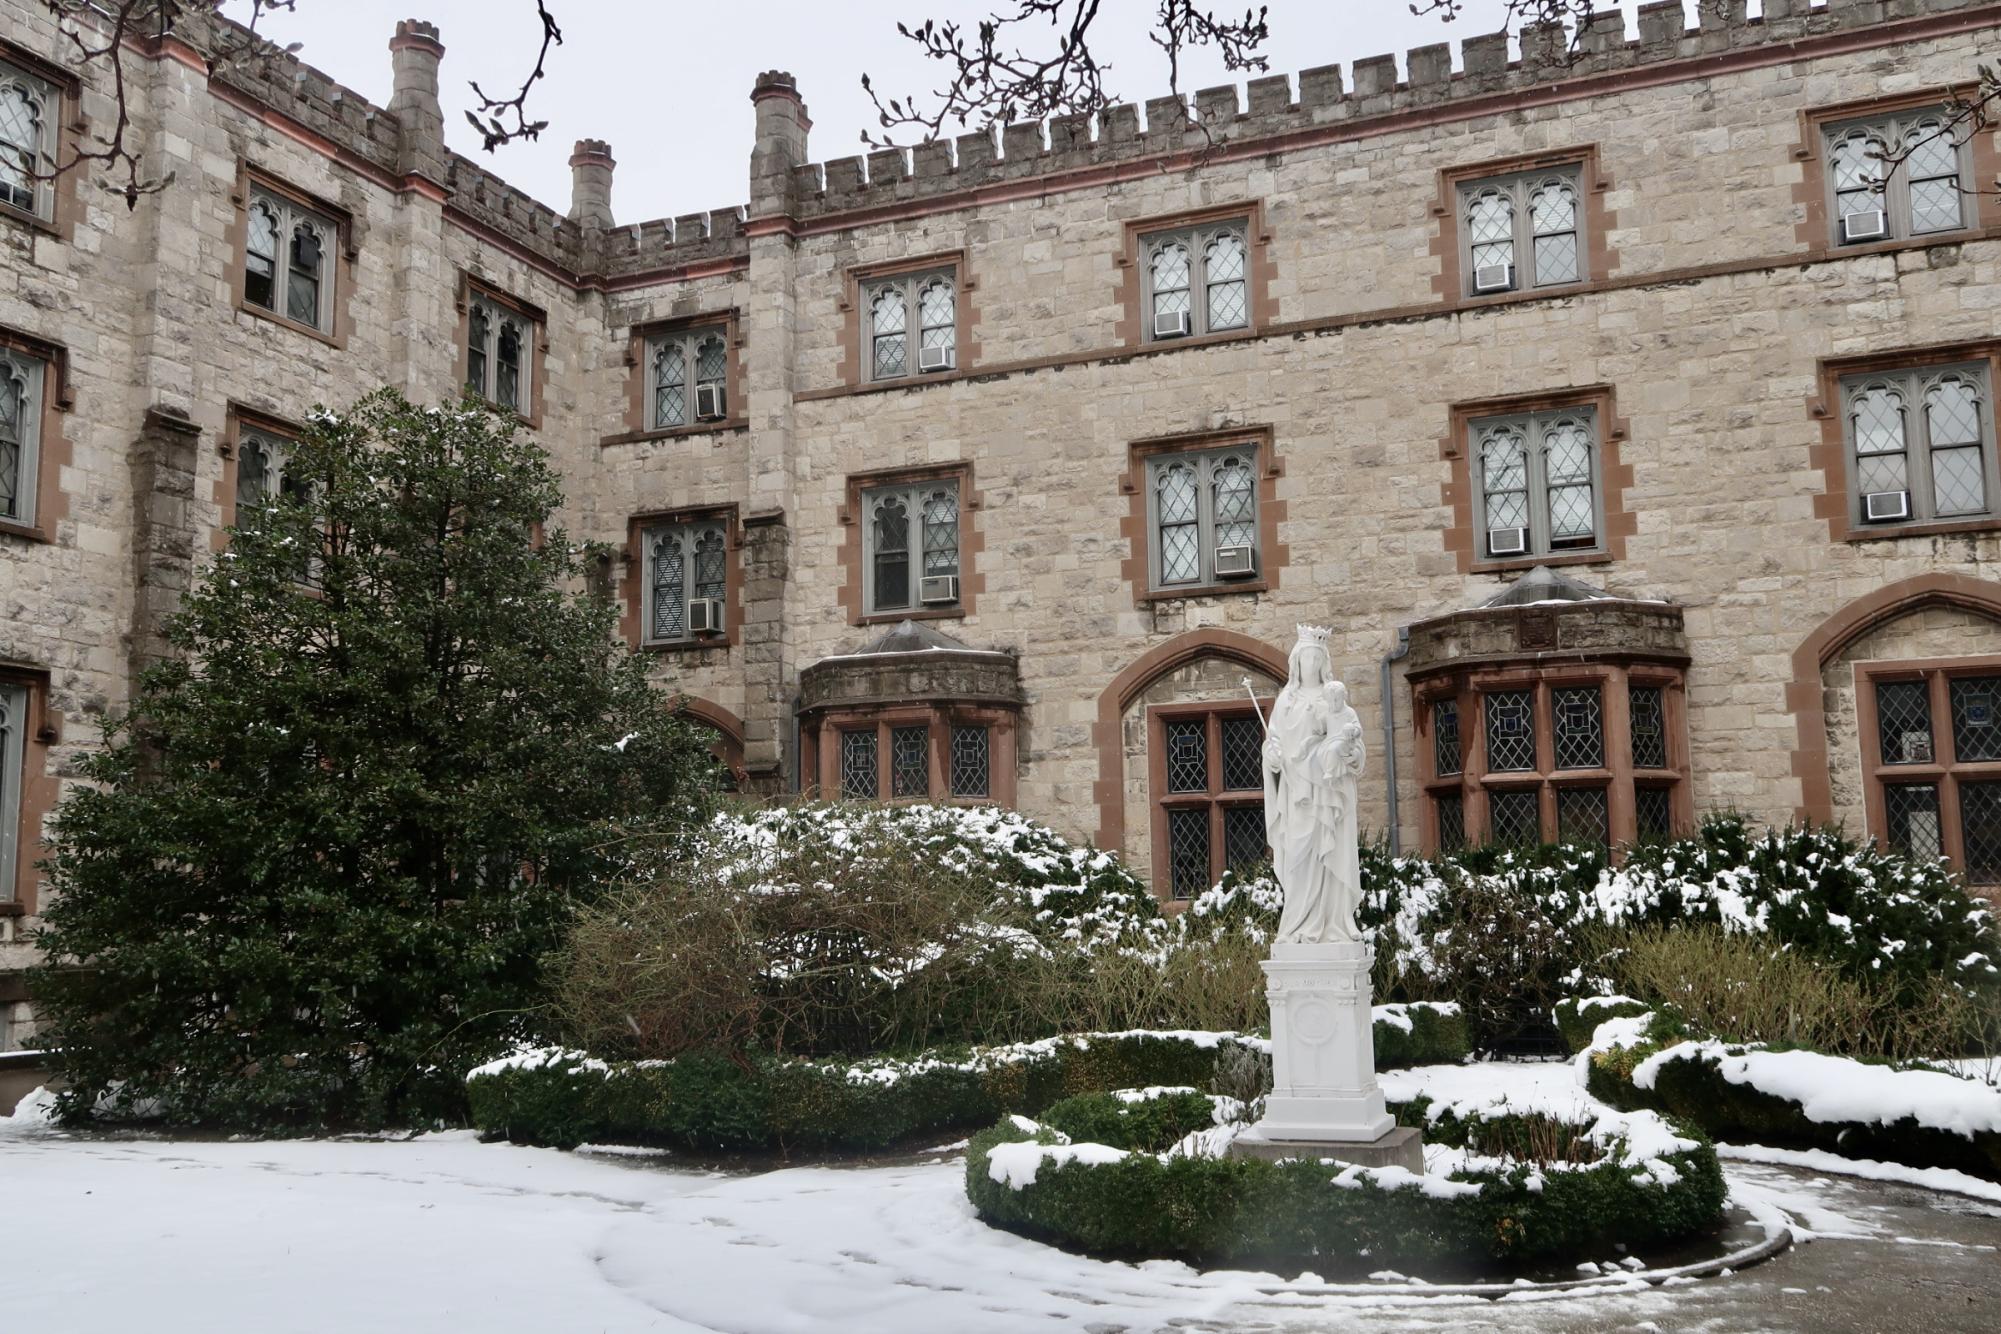 Students enjoyed a snowy day on Tuesday after the inclement weather. (Courtesy of Mary Hawthorn/ The Fordham Ram)